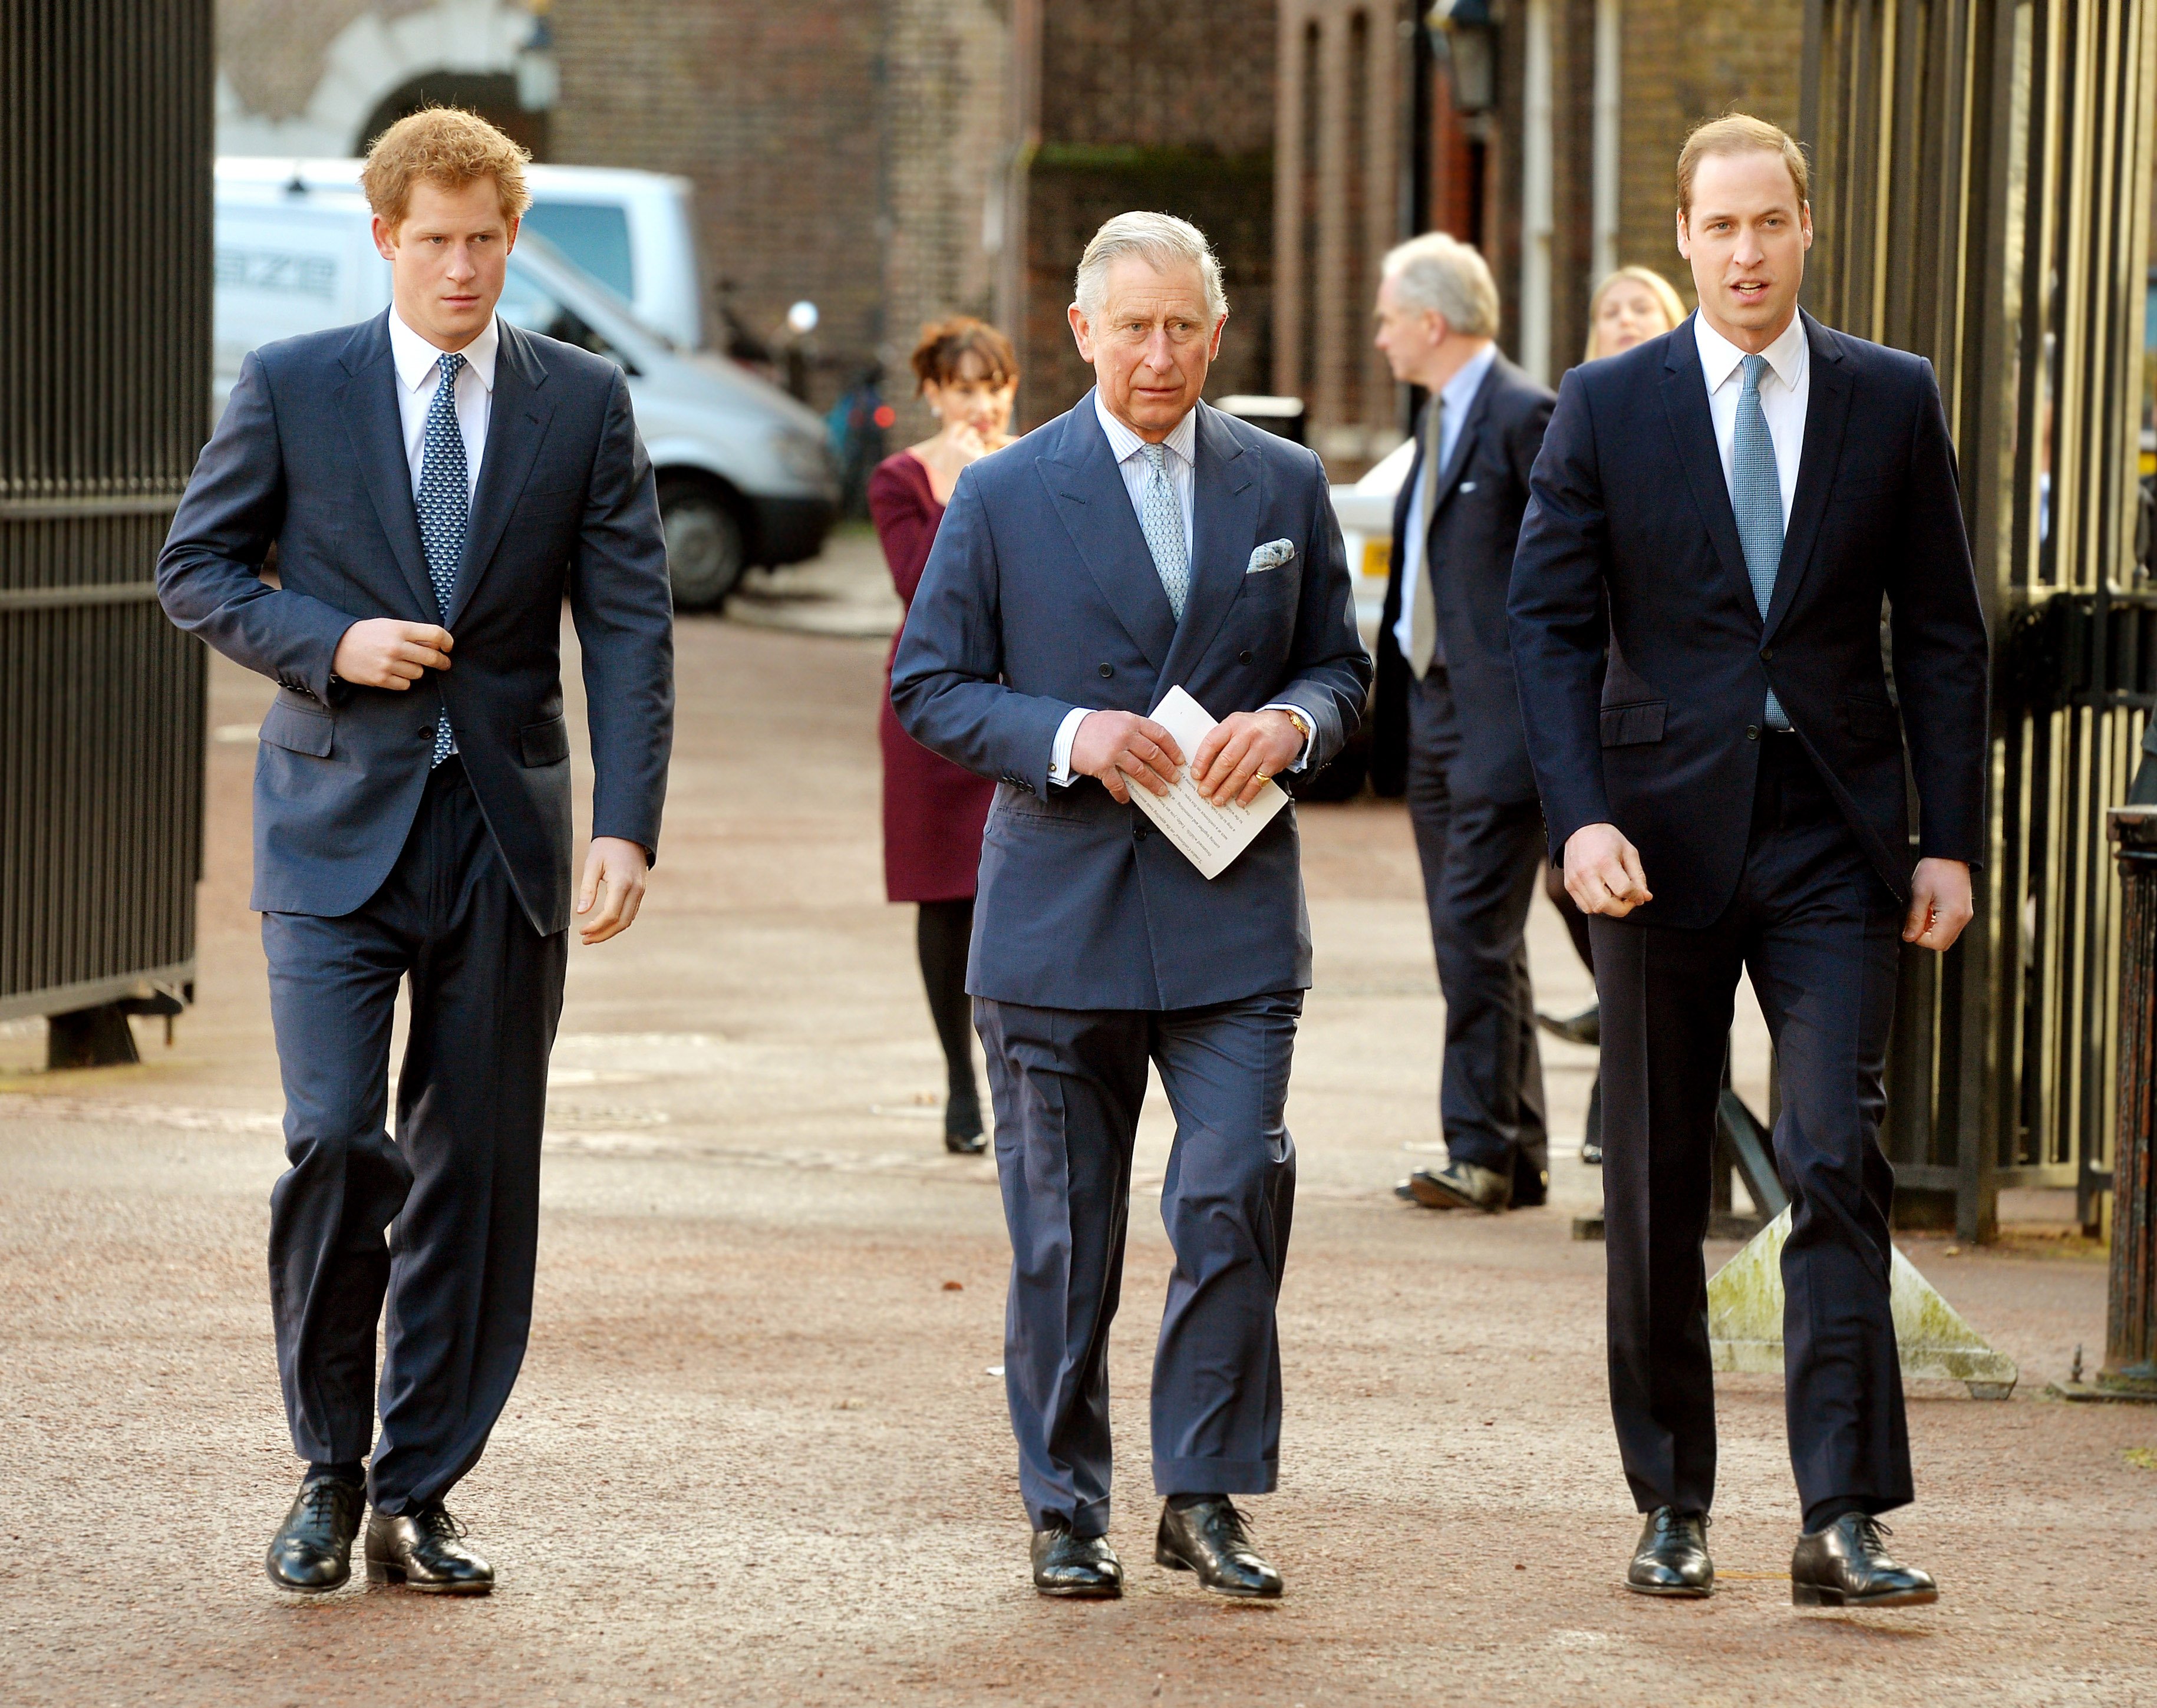 Prince Harry, Prince Charles, Prince of Wales and Prince William, Duke of Cambridge arrive at the Illegal Wildlife Trade Conference on February 13, 2014 in London, England. | Source: Getty Images 